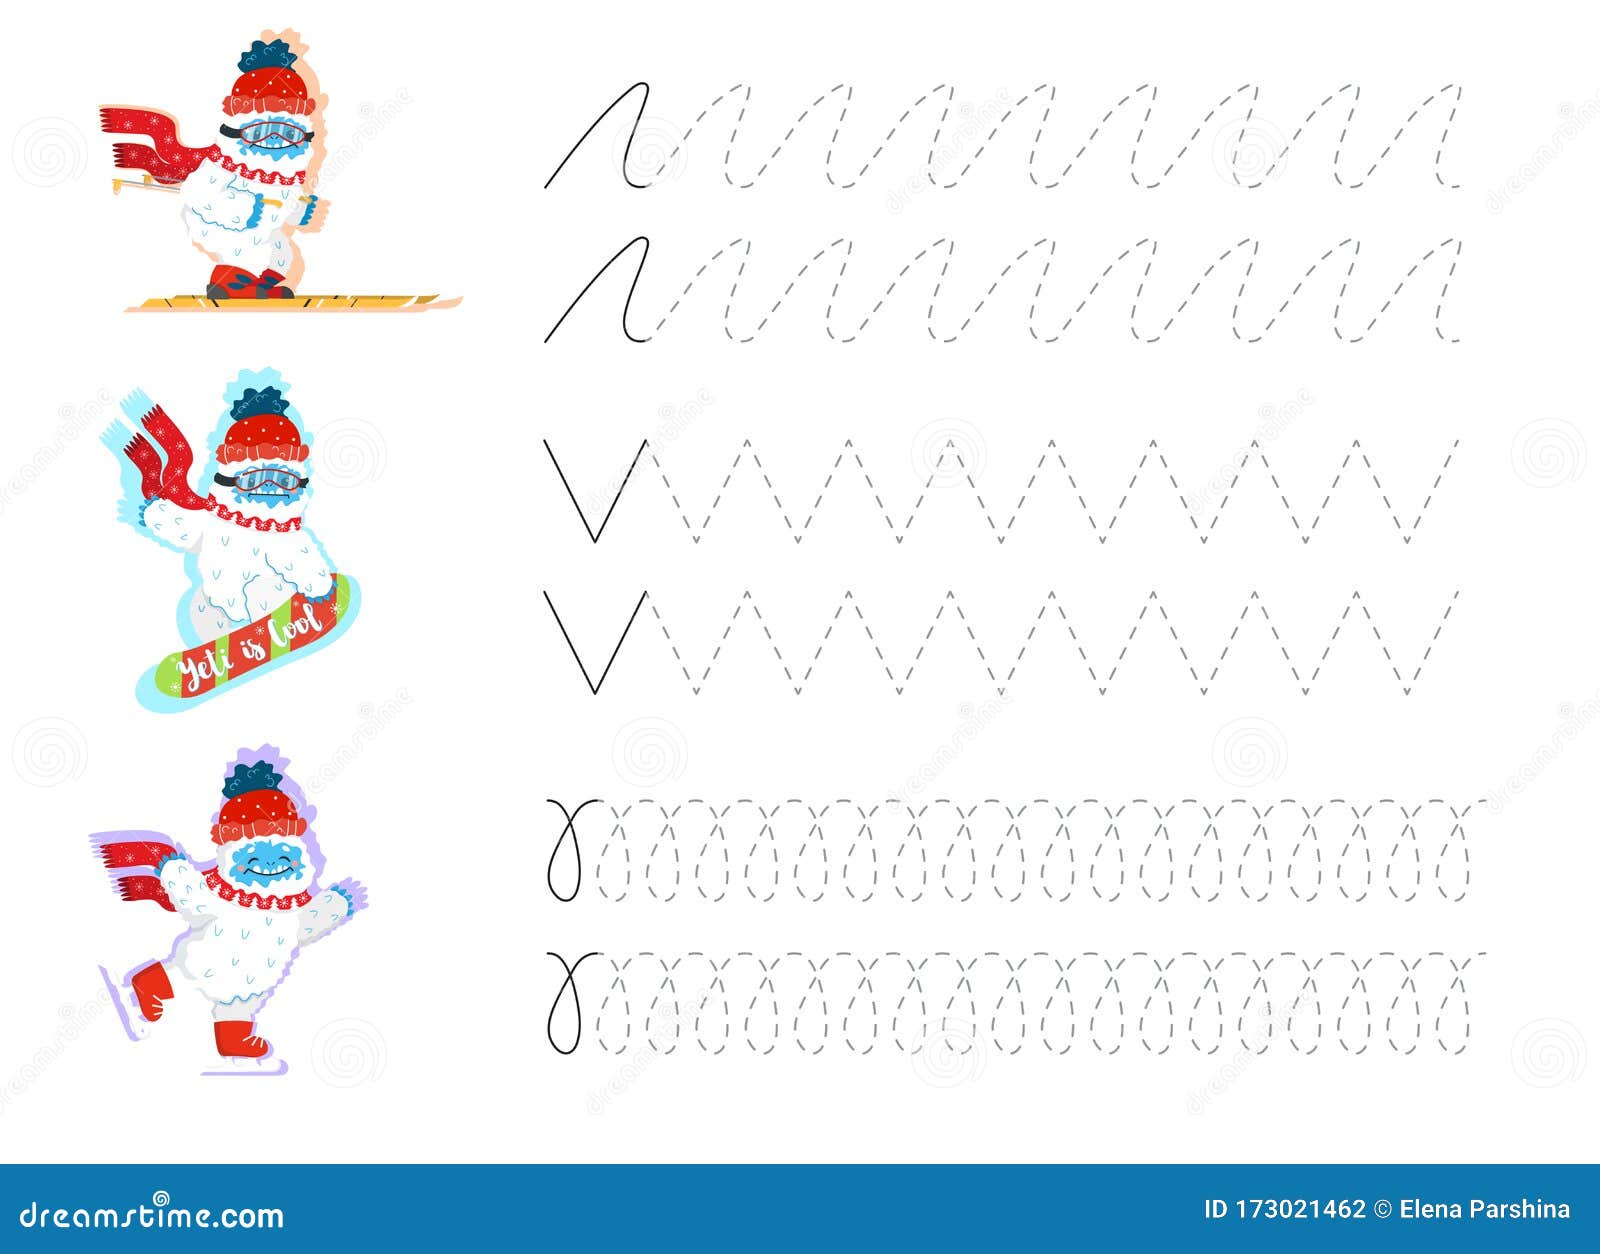 tracing lines and handwriting practice sheet for preschool children with cute snow yeti skiing snowboarding skating writing stock vector illustration of snowboard shape 173021462